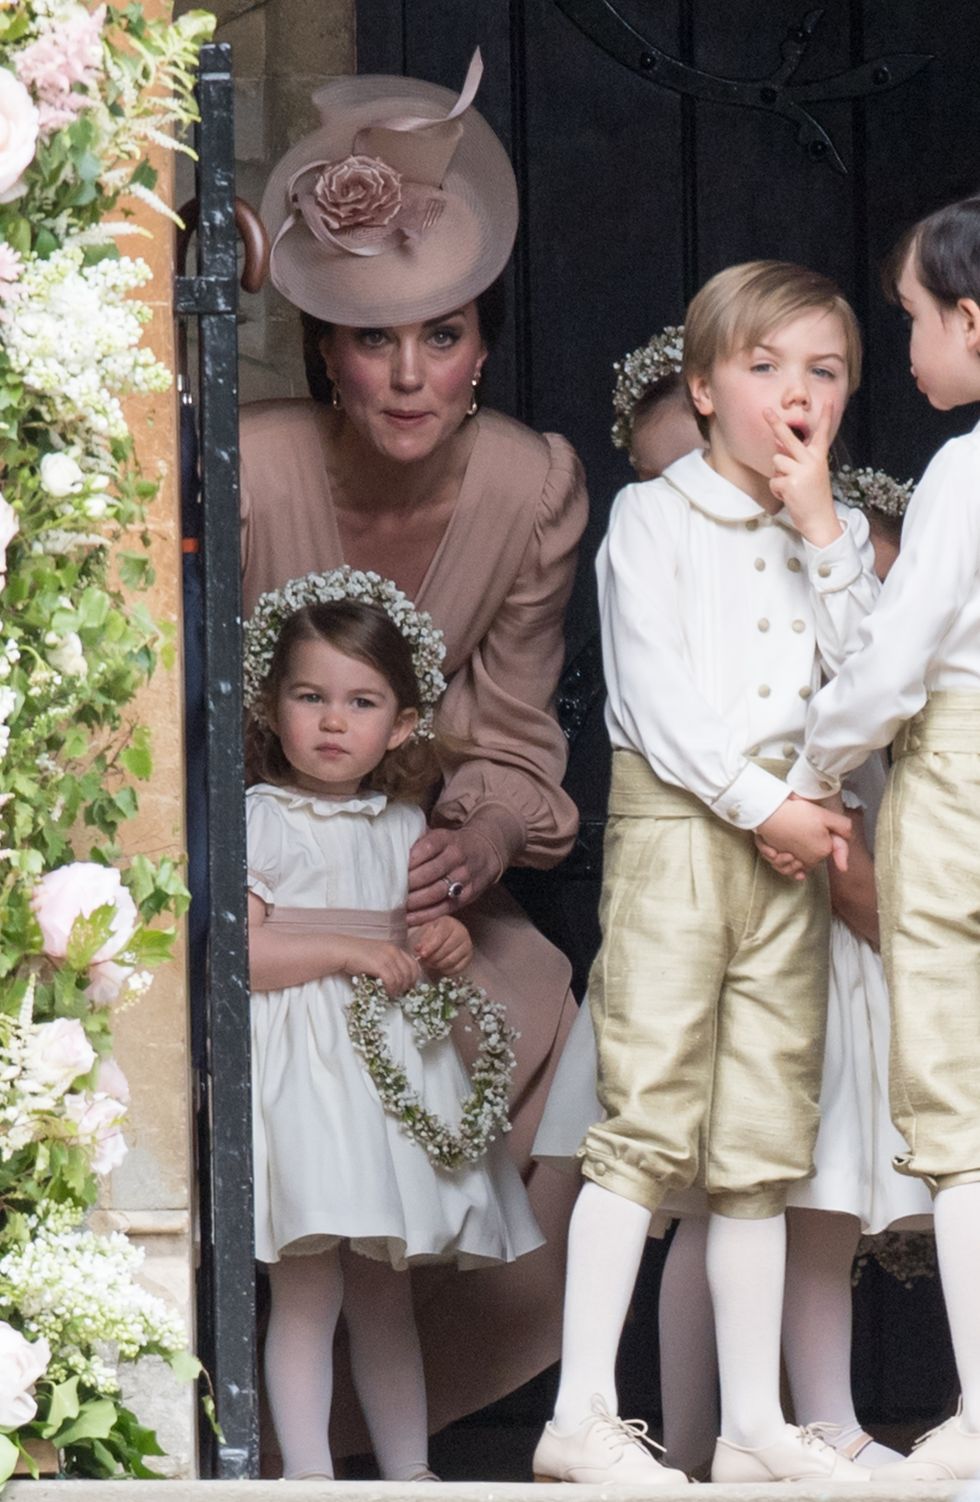 Flower Girls and Page Boys at Pippa Middleton's Wedding